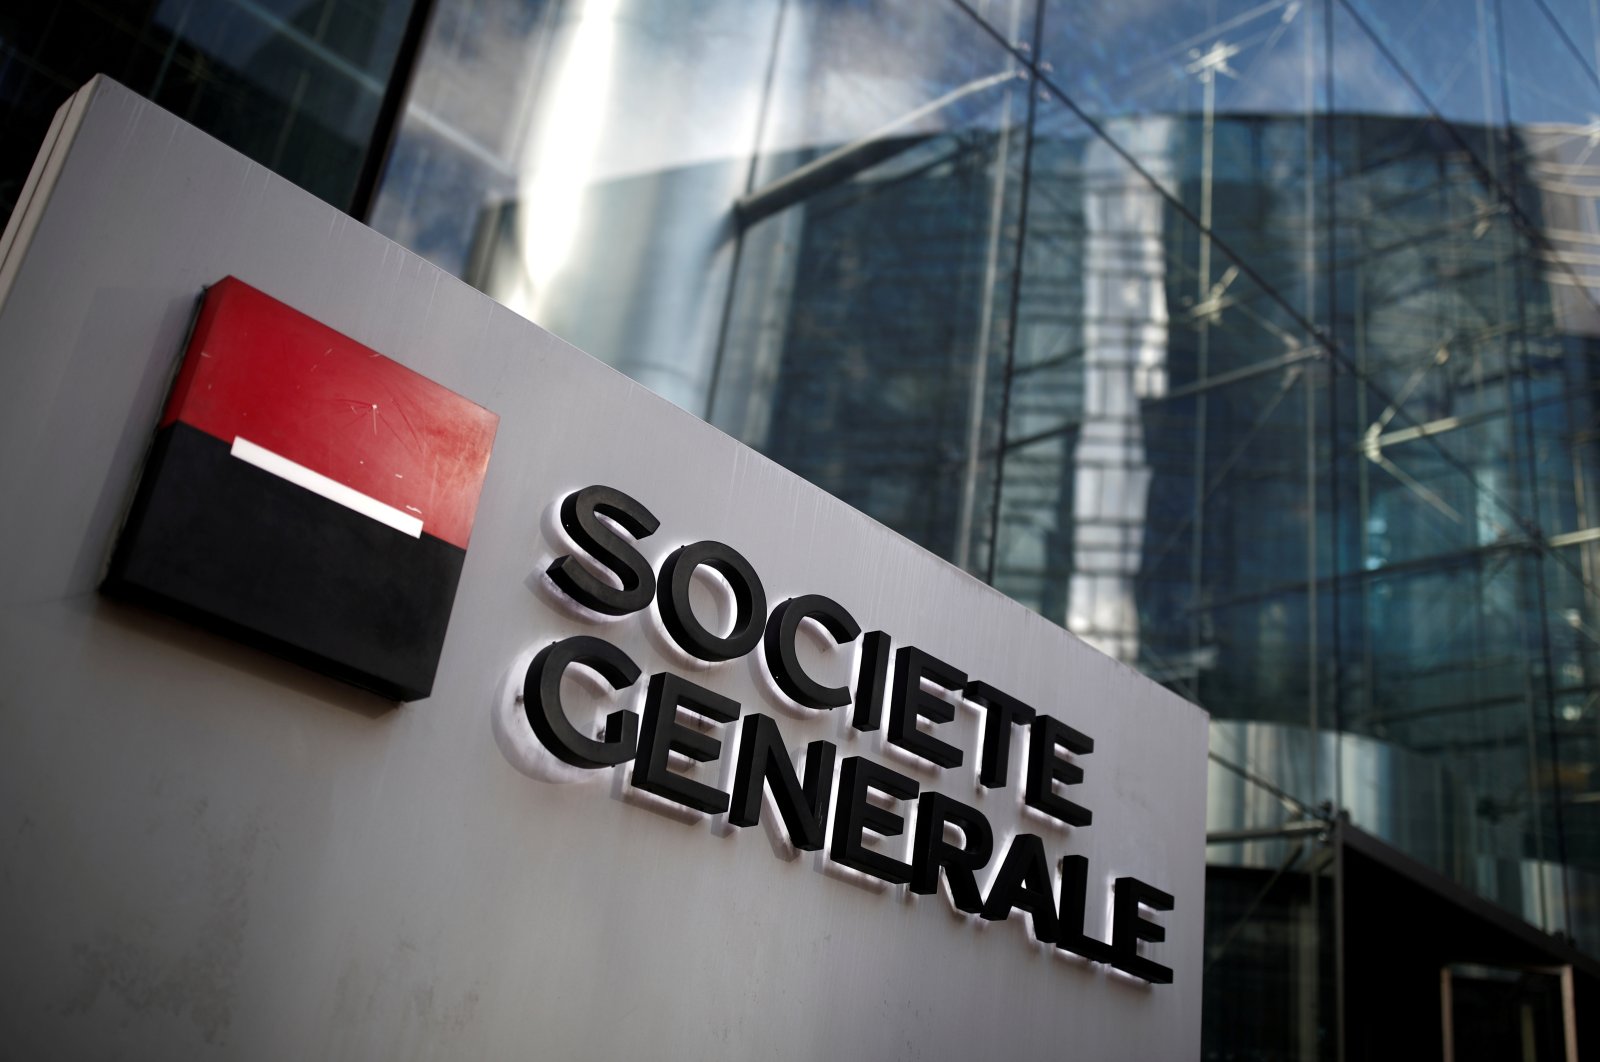 The logo of Societe Generale at its headquarters in the financial and business district of La Defense near Paris, France, Feb. 4, 2020. (Reuters Photo)